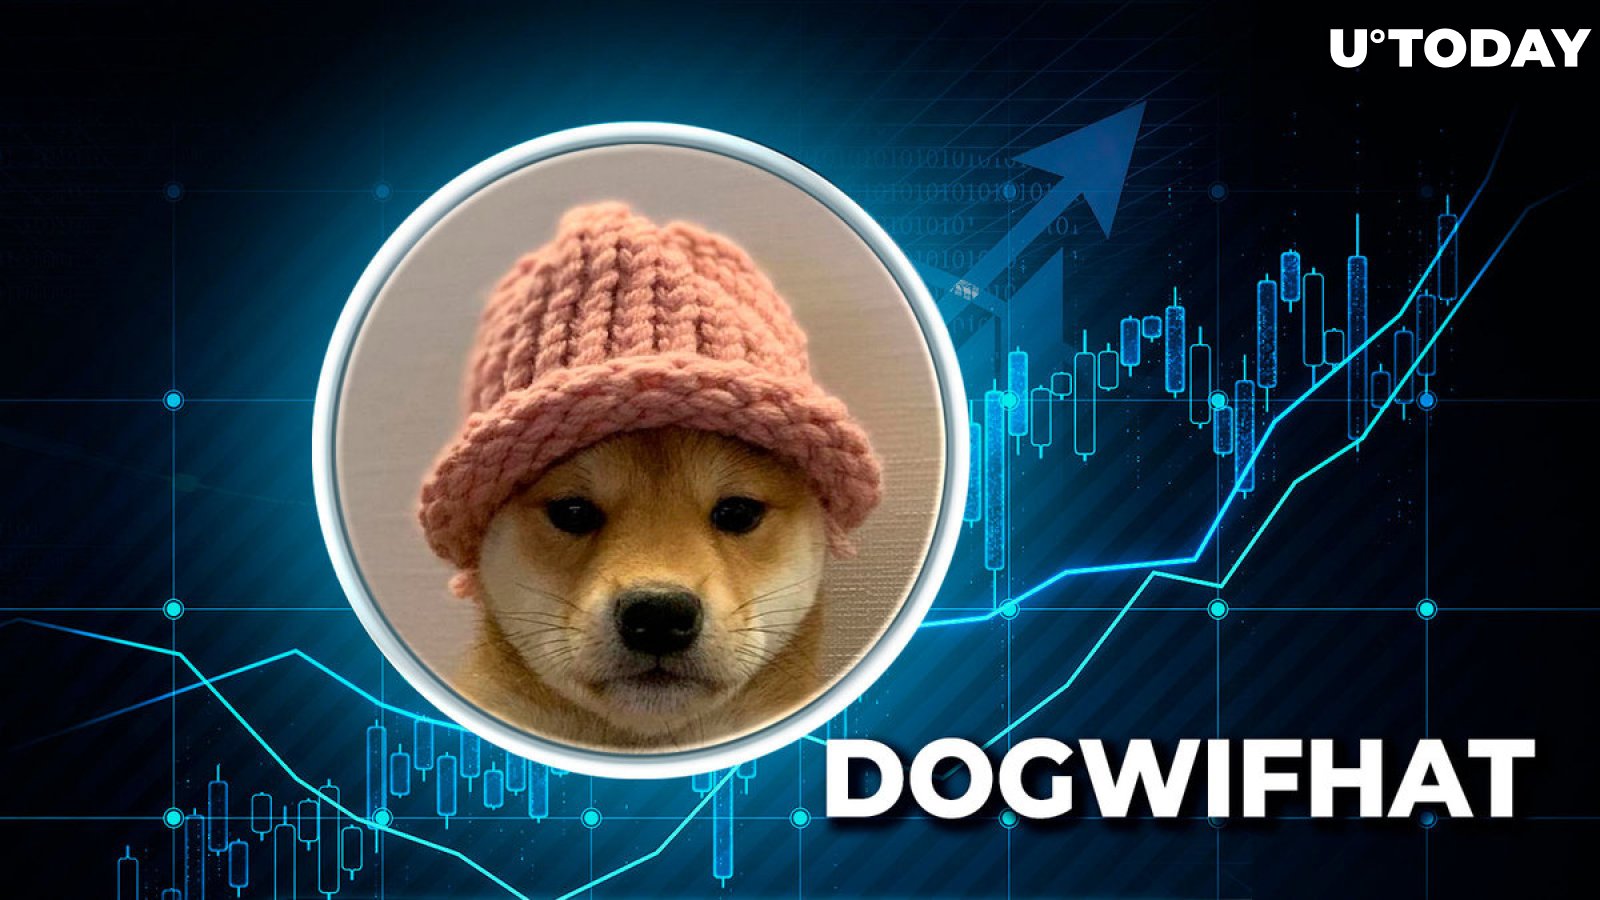 Top Solana Meme Coin Dogwifhat (WIF) Skyrockets 1,481% in Major Exchange Listing Anomaly